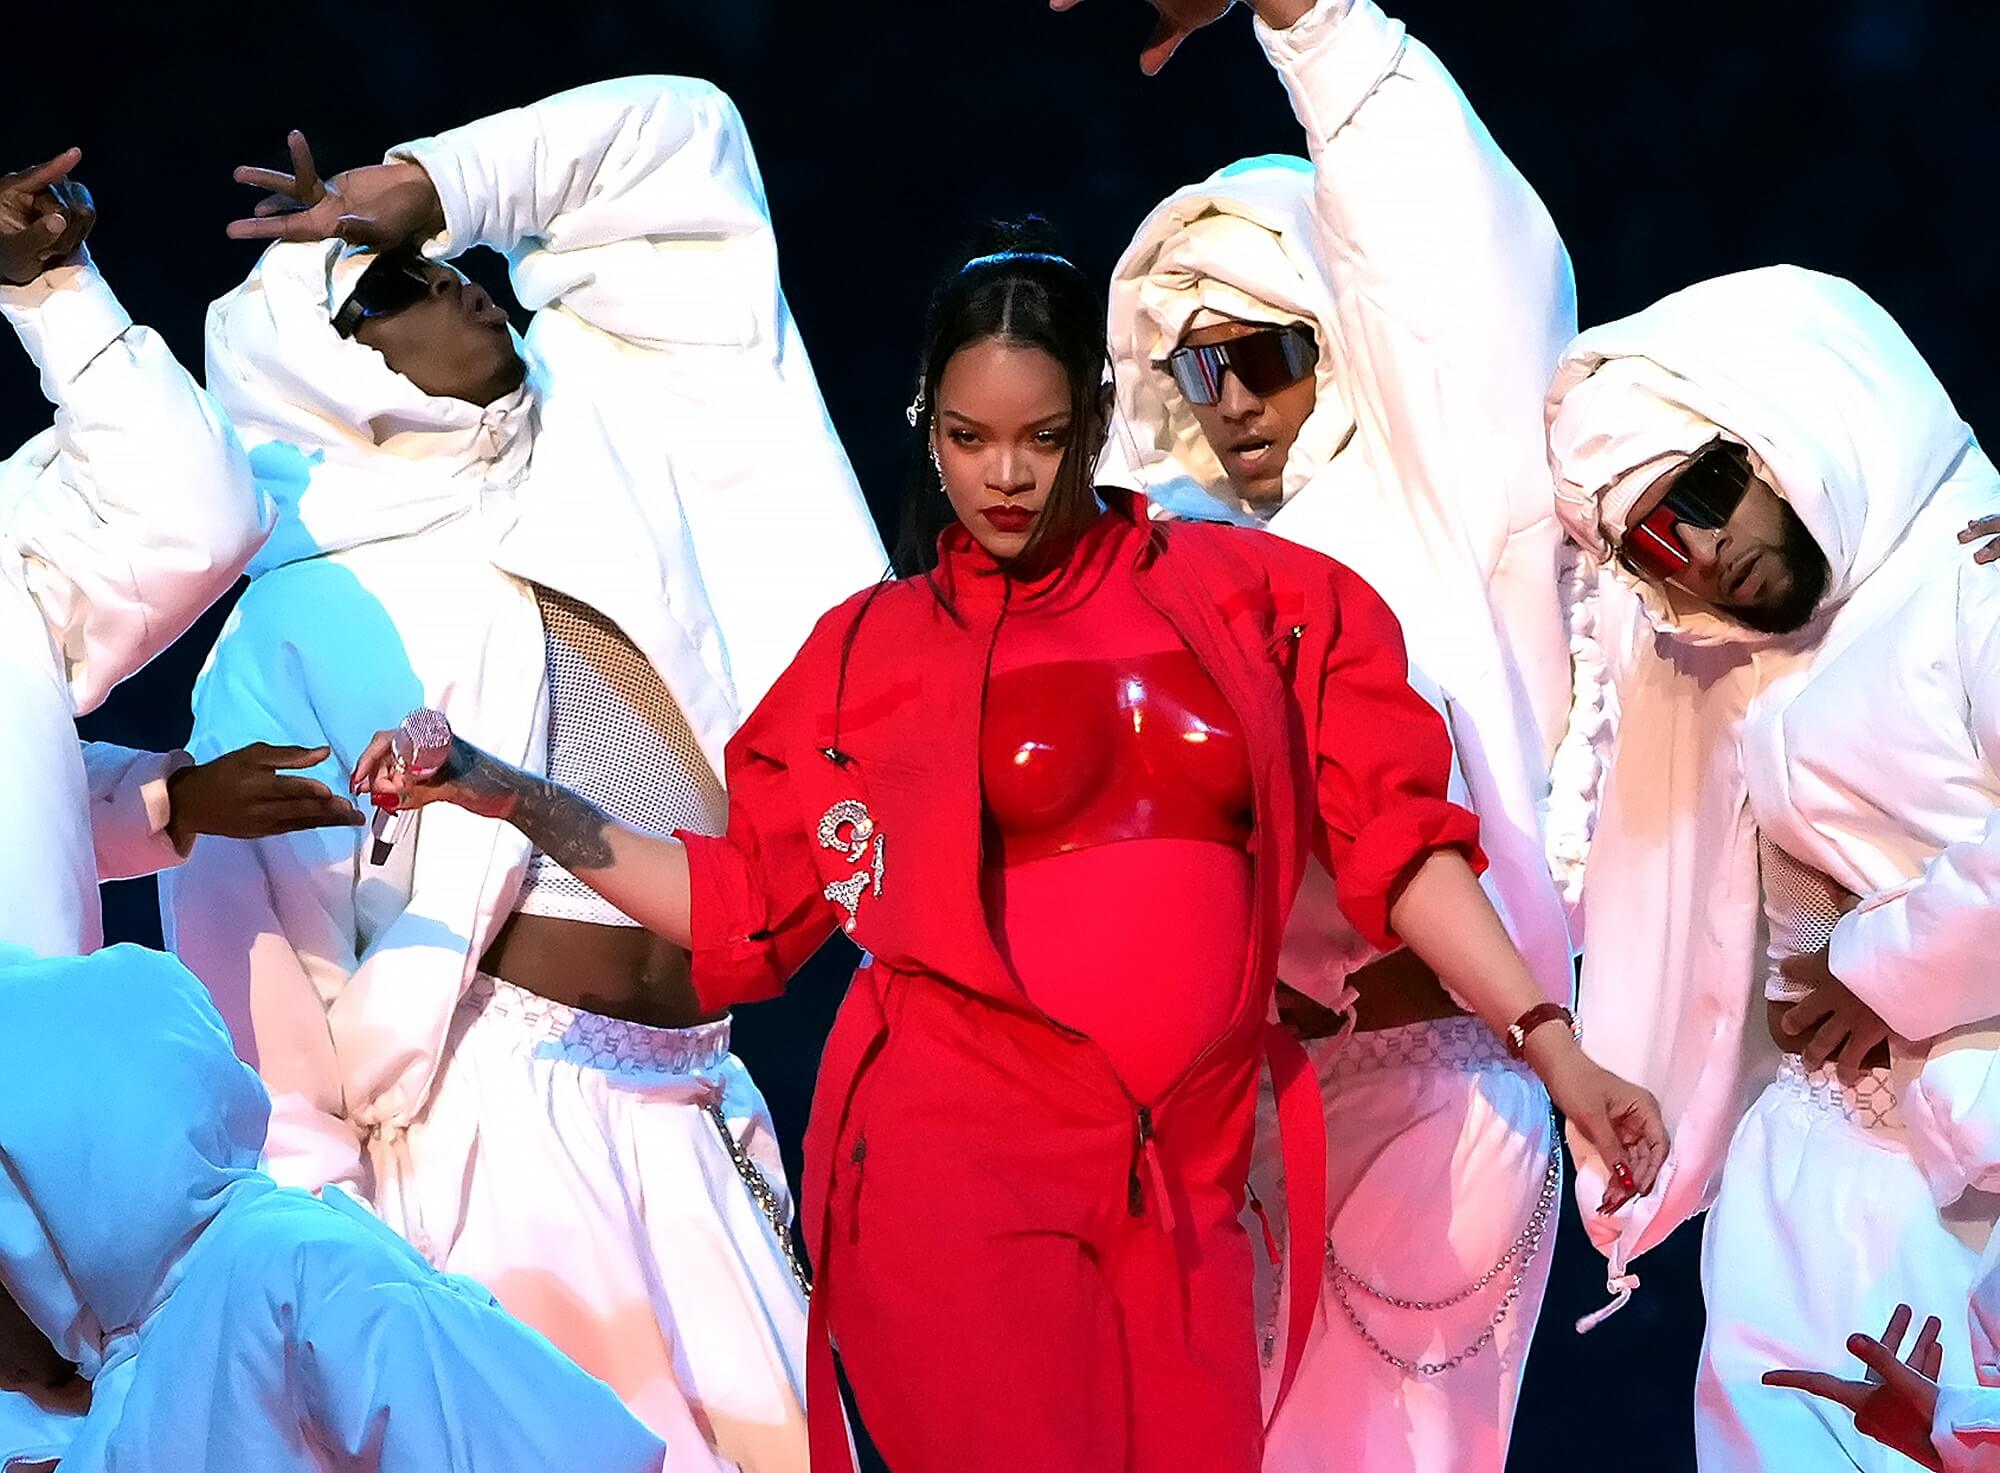 Rihanna wears a red outfit while surrounded by backup dancers in white outfits